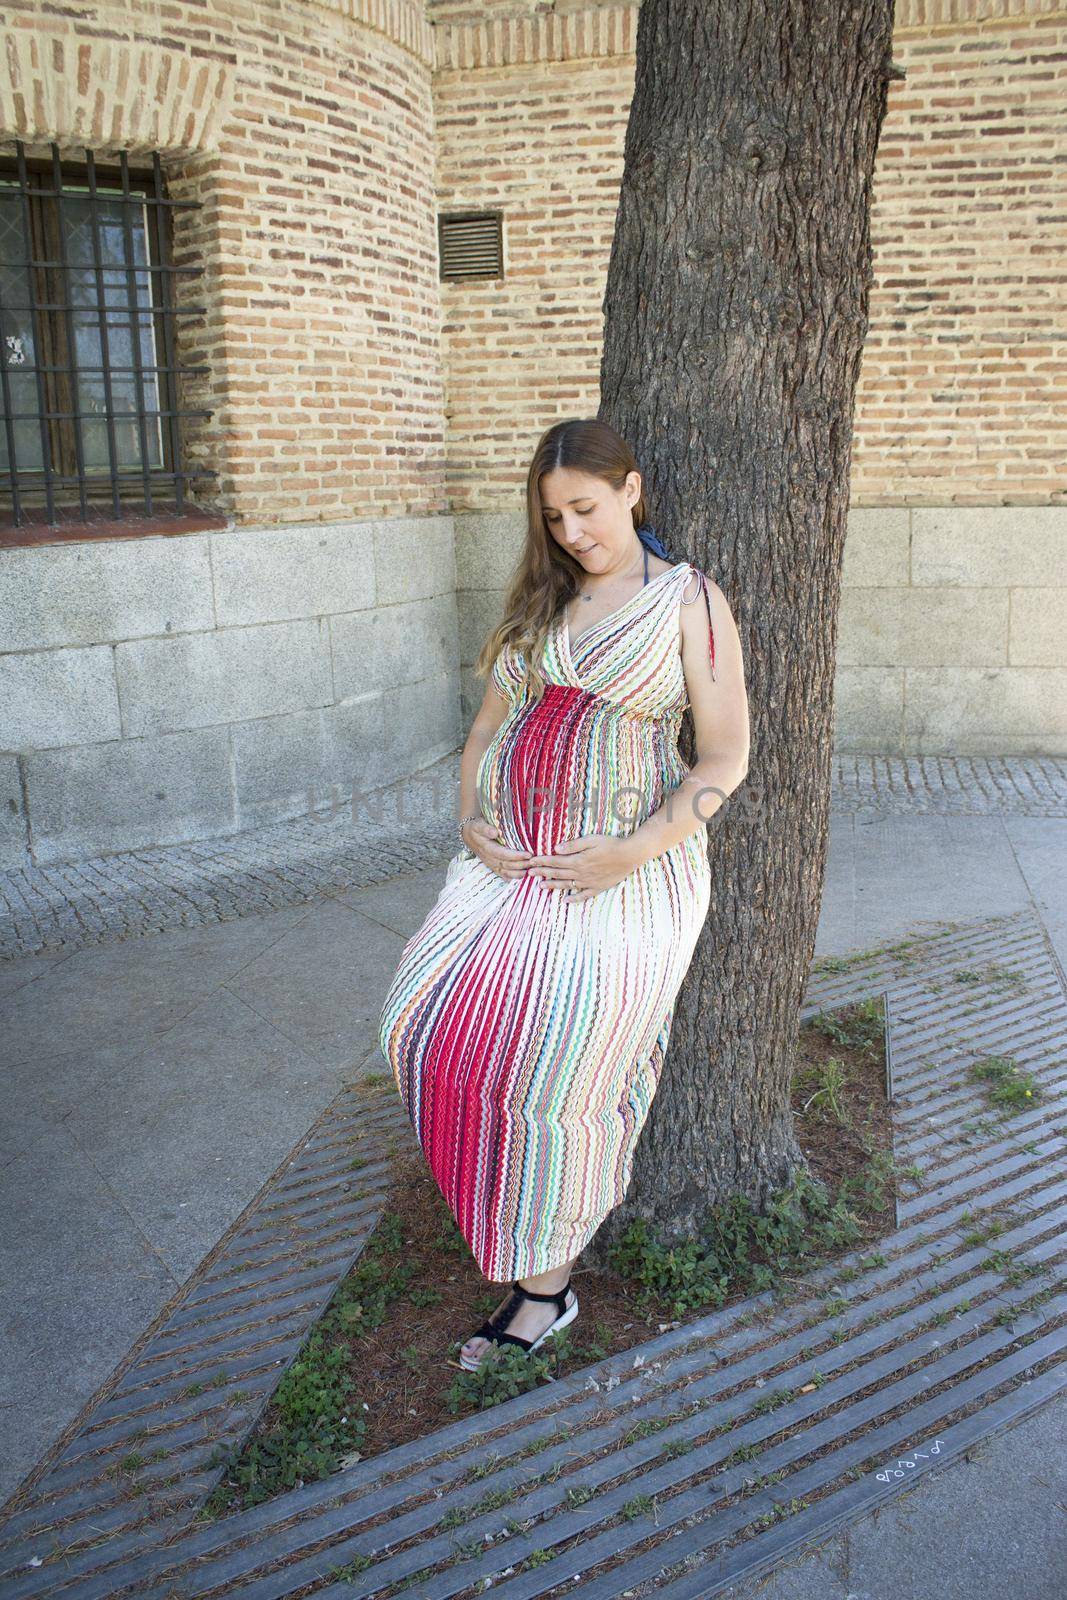 Seven month pregnant woman outdoors in multi colored striped dress. Day scene